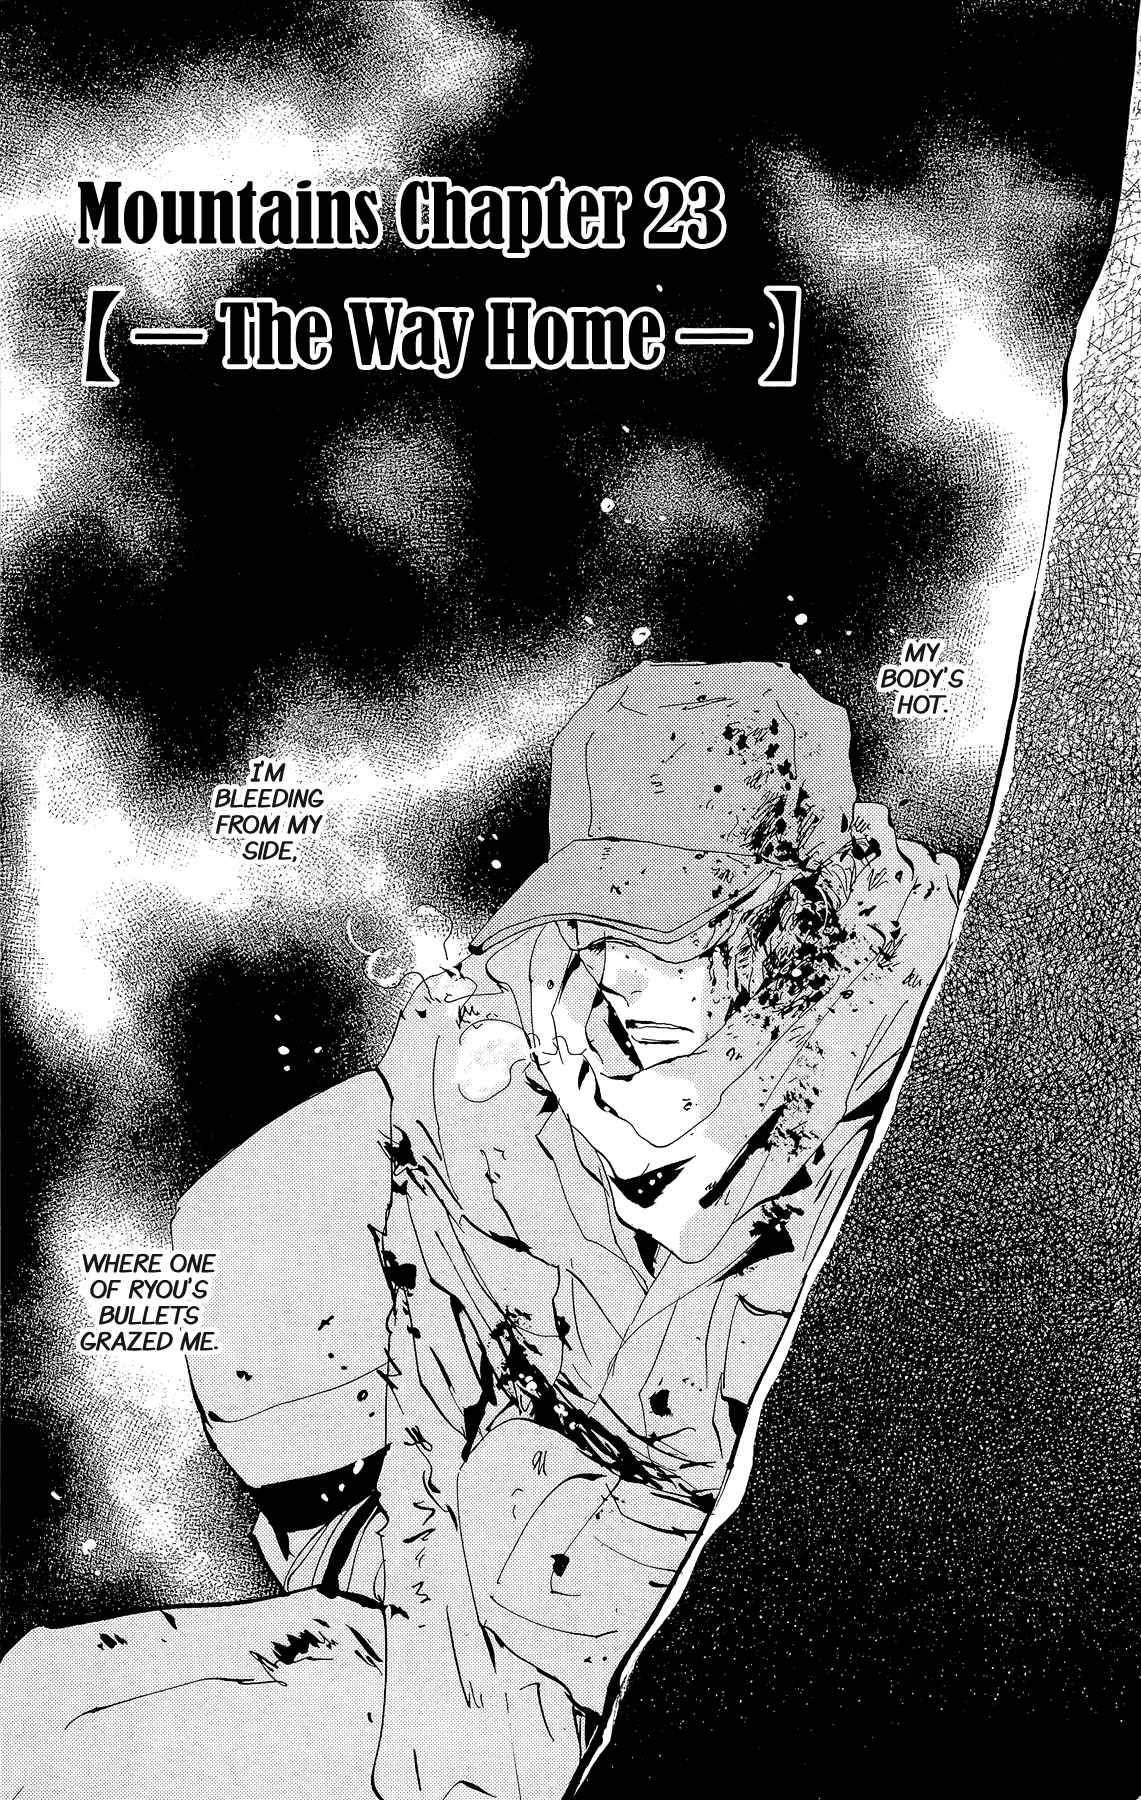 7 Seeds Vol. 31 Ch. 158 Mountains Chapter 23 [The Way Home]